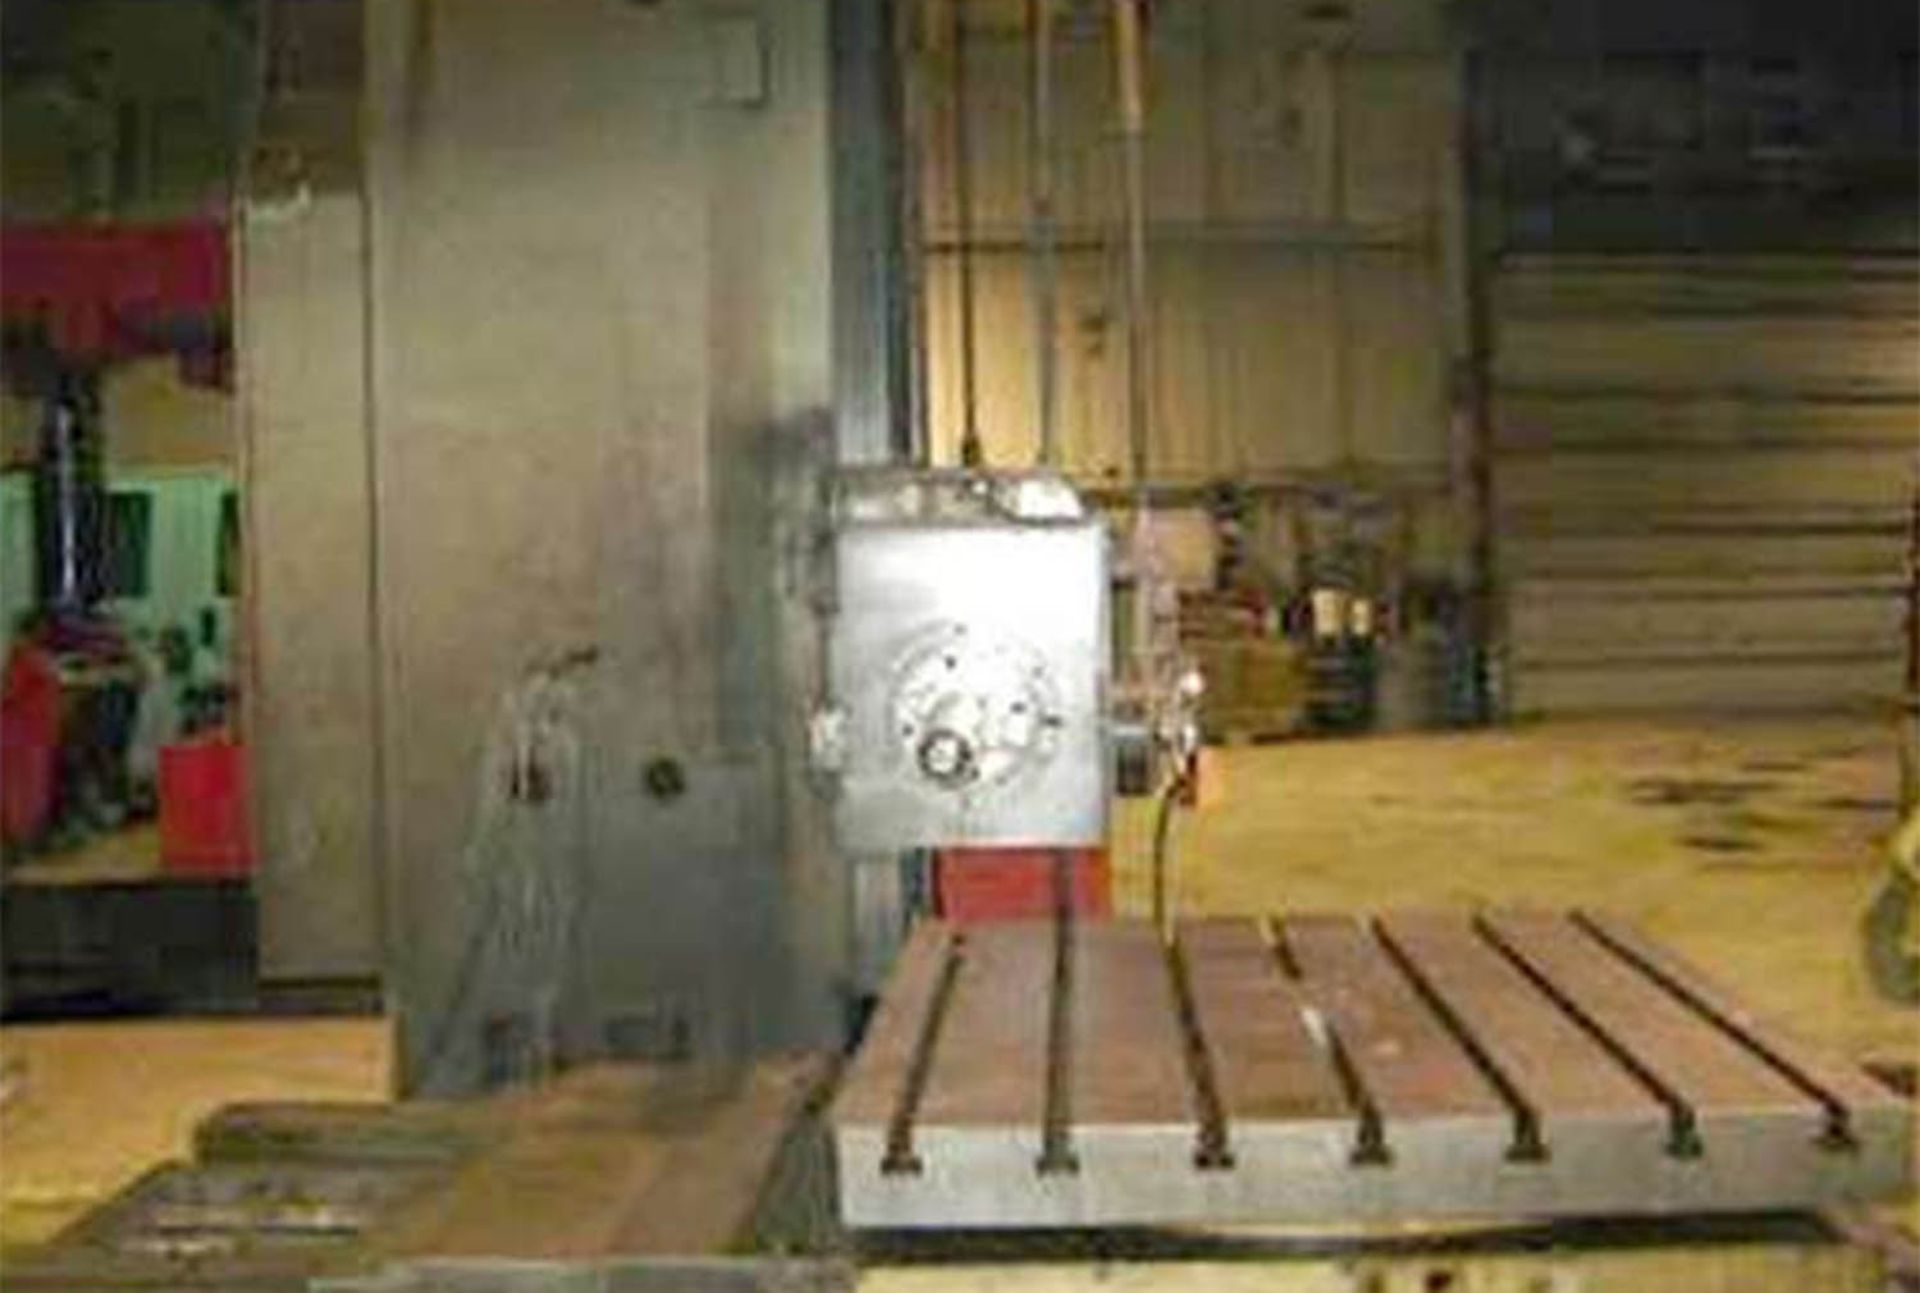 Toshiba Shibaura - Table Type Horizontal Boring Mill (Rotary Table) | 4", Located In Milwaukee, WI - - Image 8 of 10